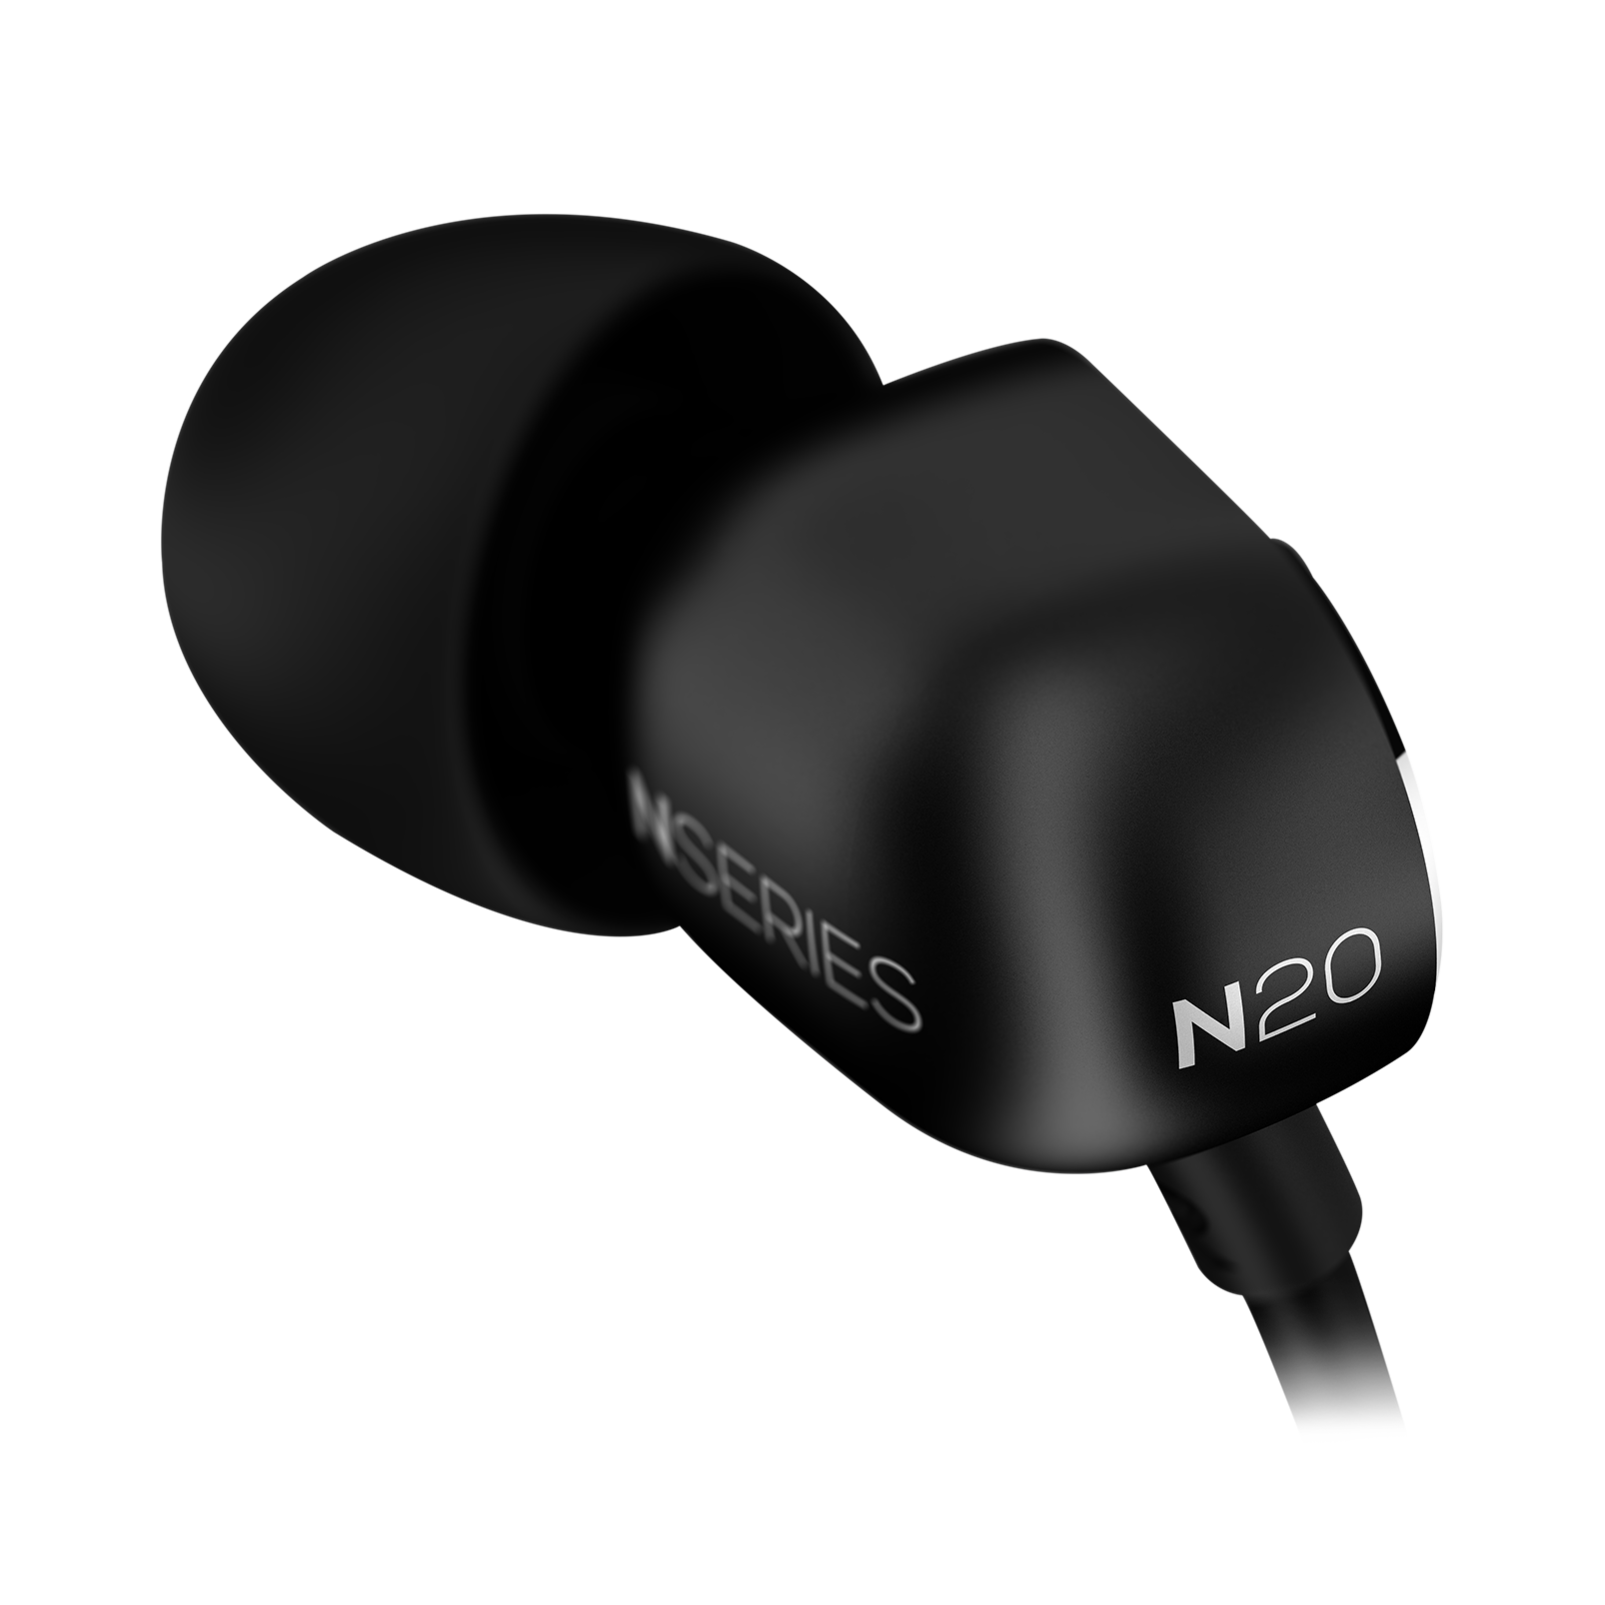 N20U - Black - Reference class in-ear headphones with universal 3 button remote. - Detailshot 5